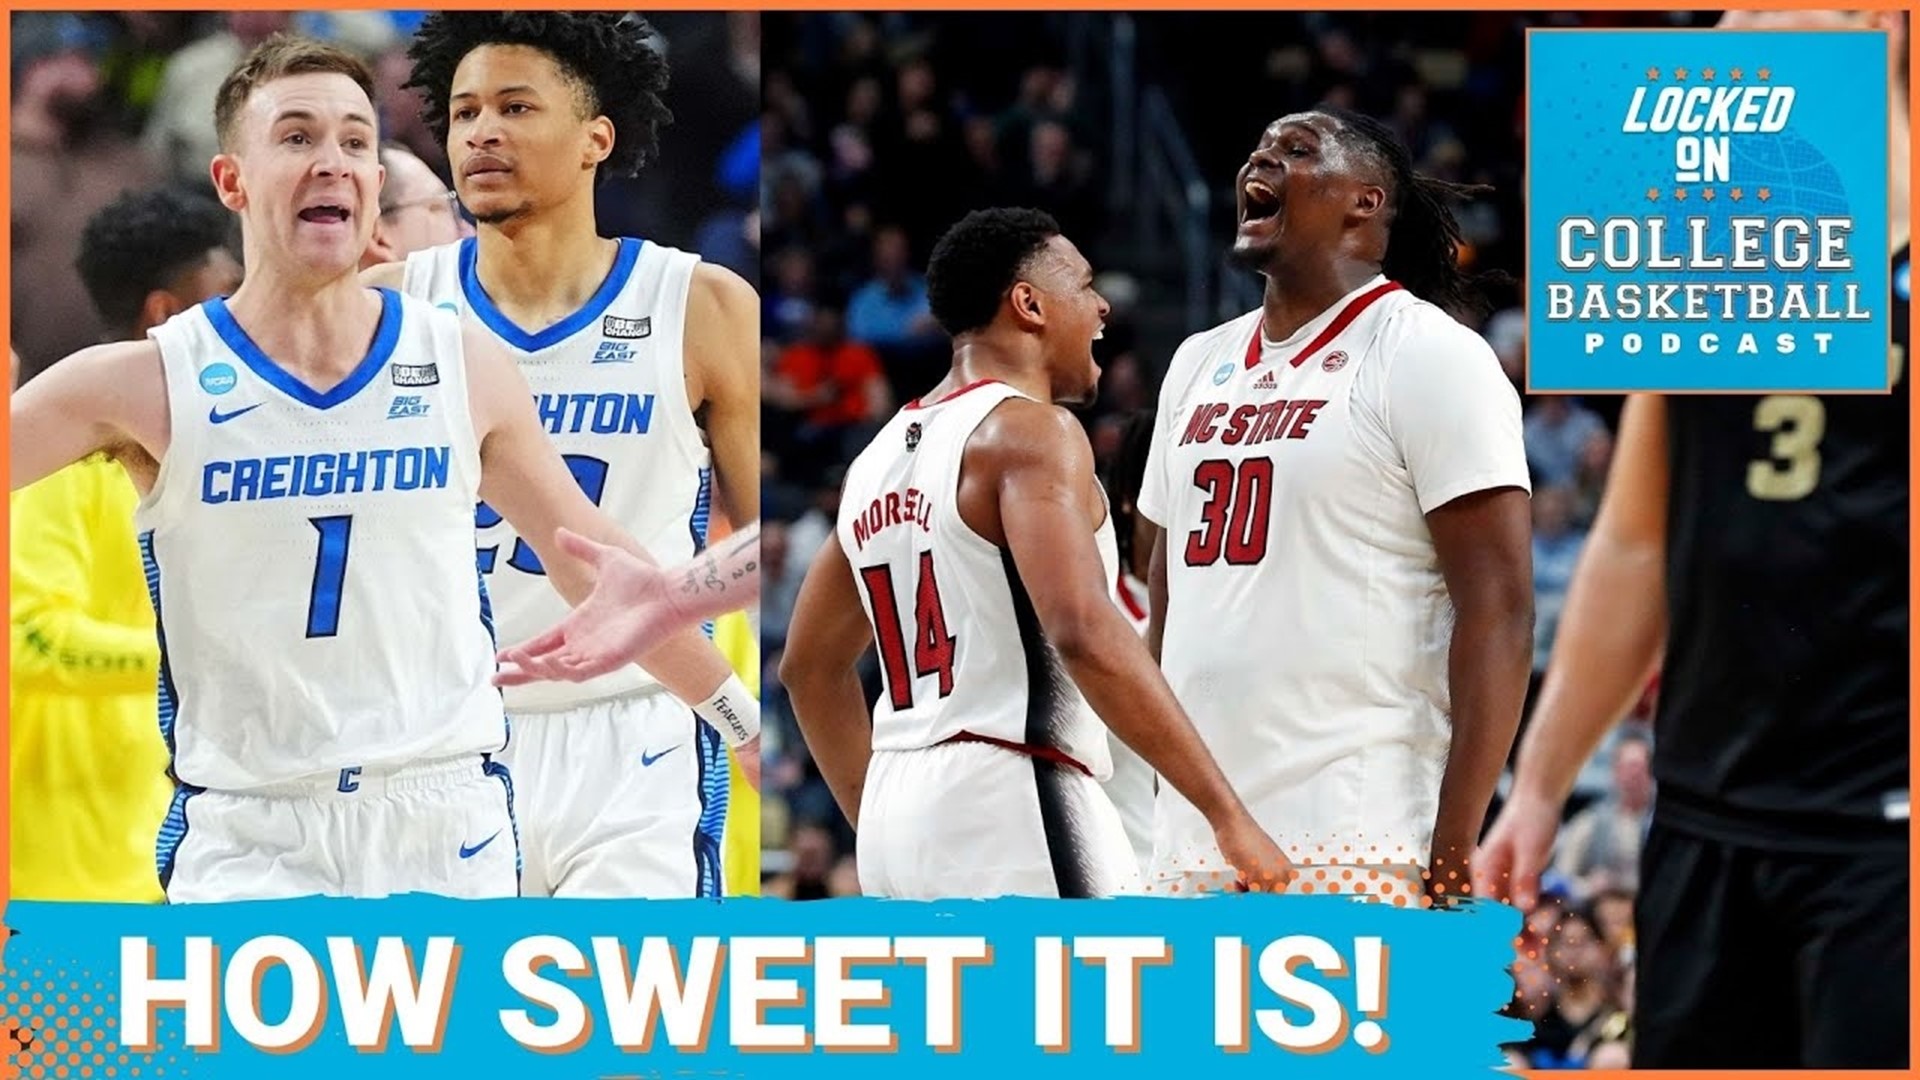 Tennessee held off a late Texas surge to push their way into the Sweet 16 behind 18 points from Dalton Knecht. NC State carried on their end-of-season miracle.